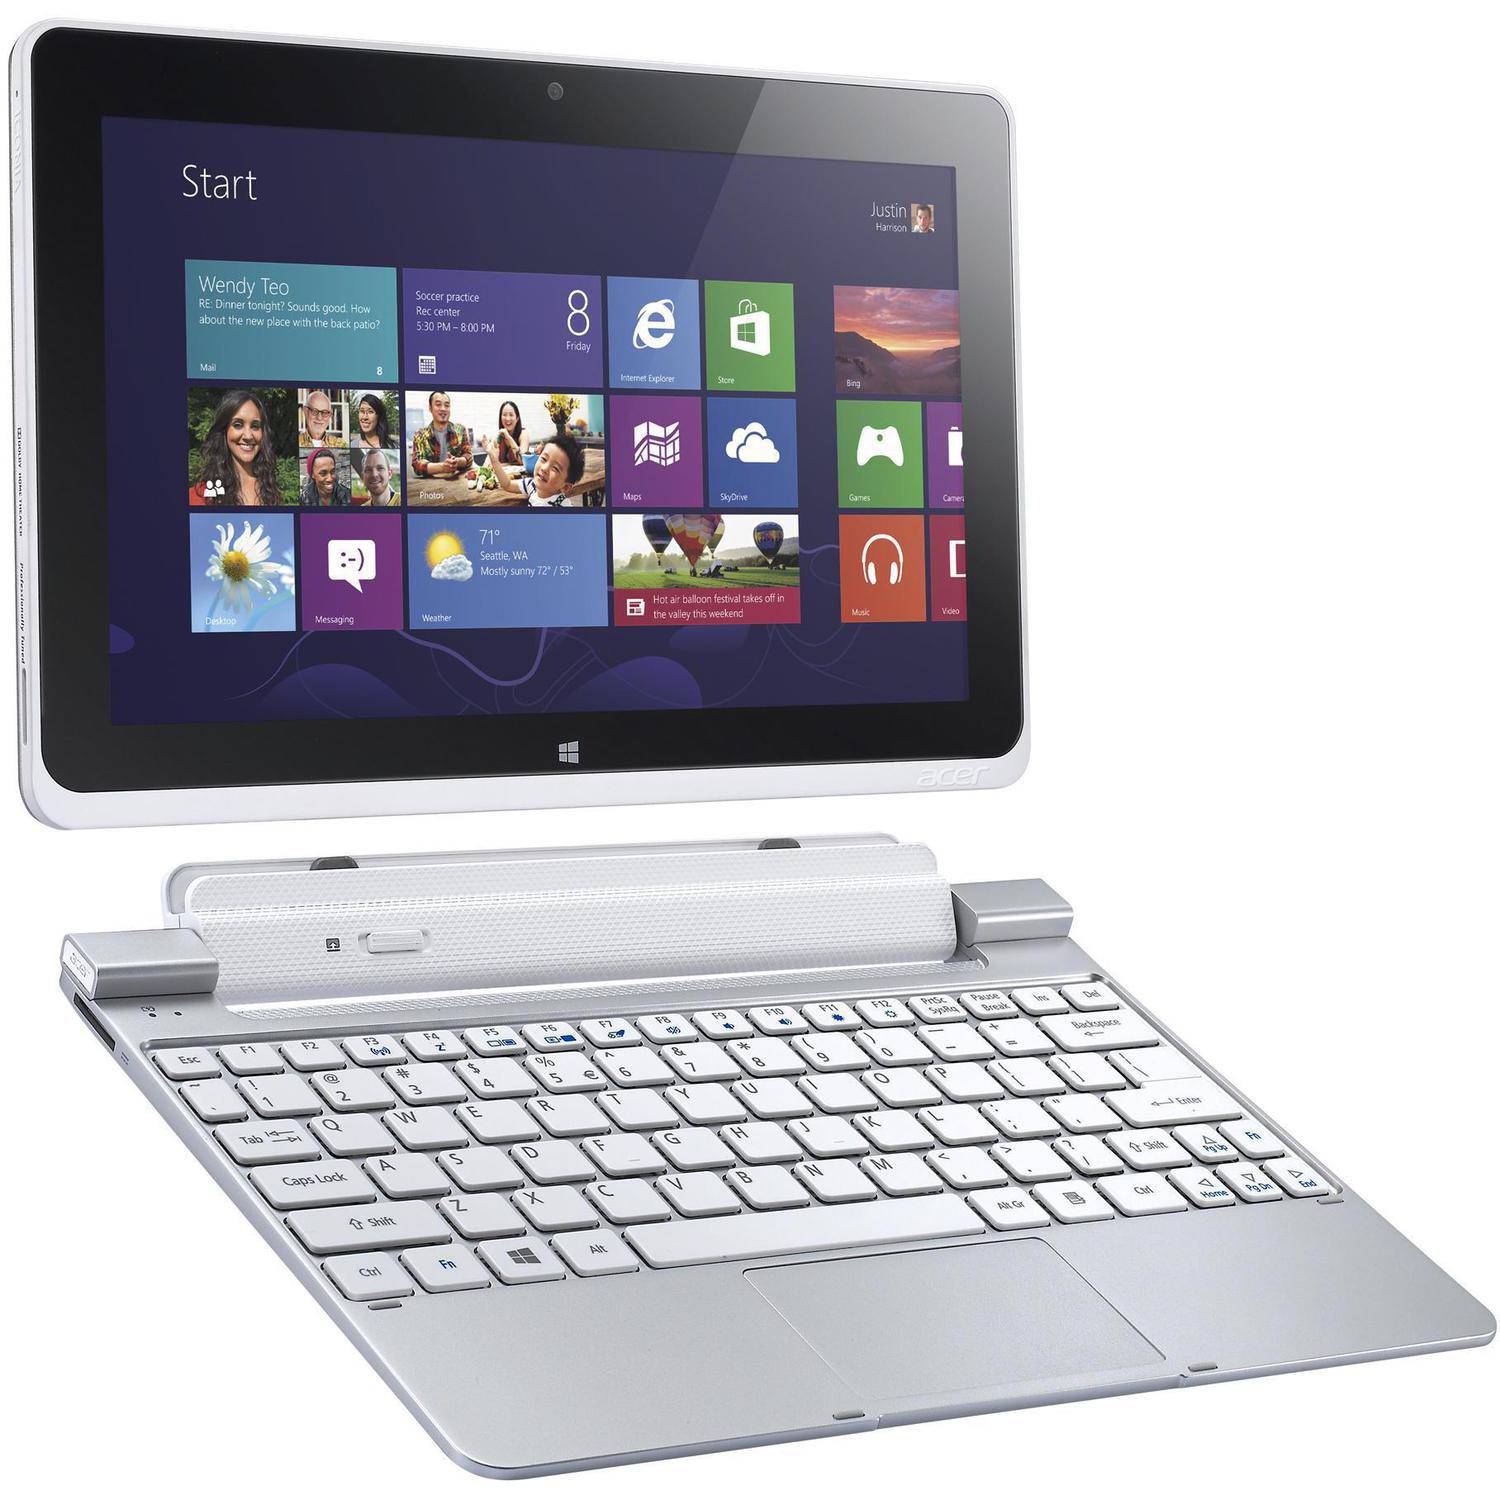 Acer White 10.1" ICONIA W510-1849 2-in-1 Convertible PC with Intel Atom Dual-Core Z2760 Processor, 2GB Memory, 32GB Hard Drive and Windows 8 - image 1 of 9